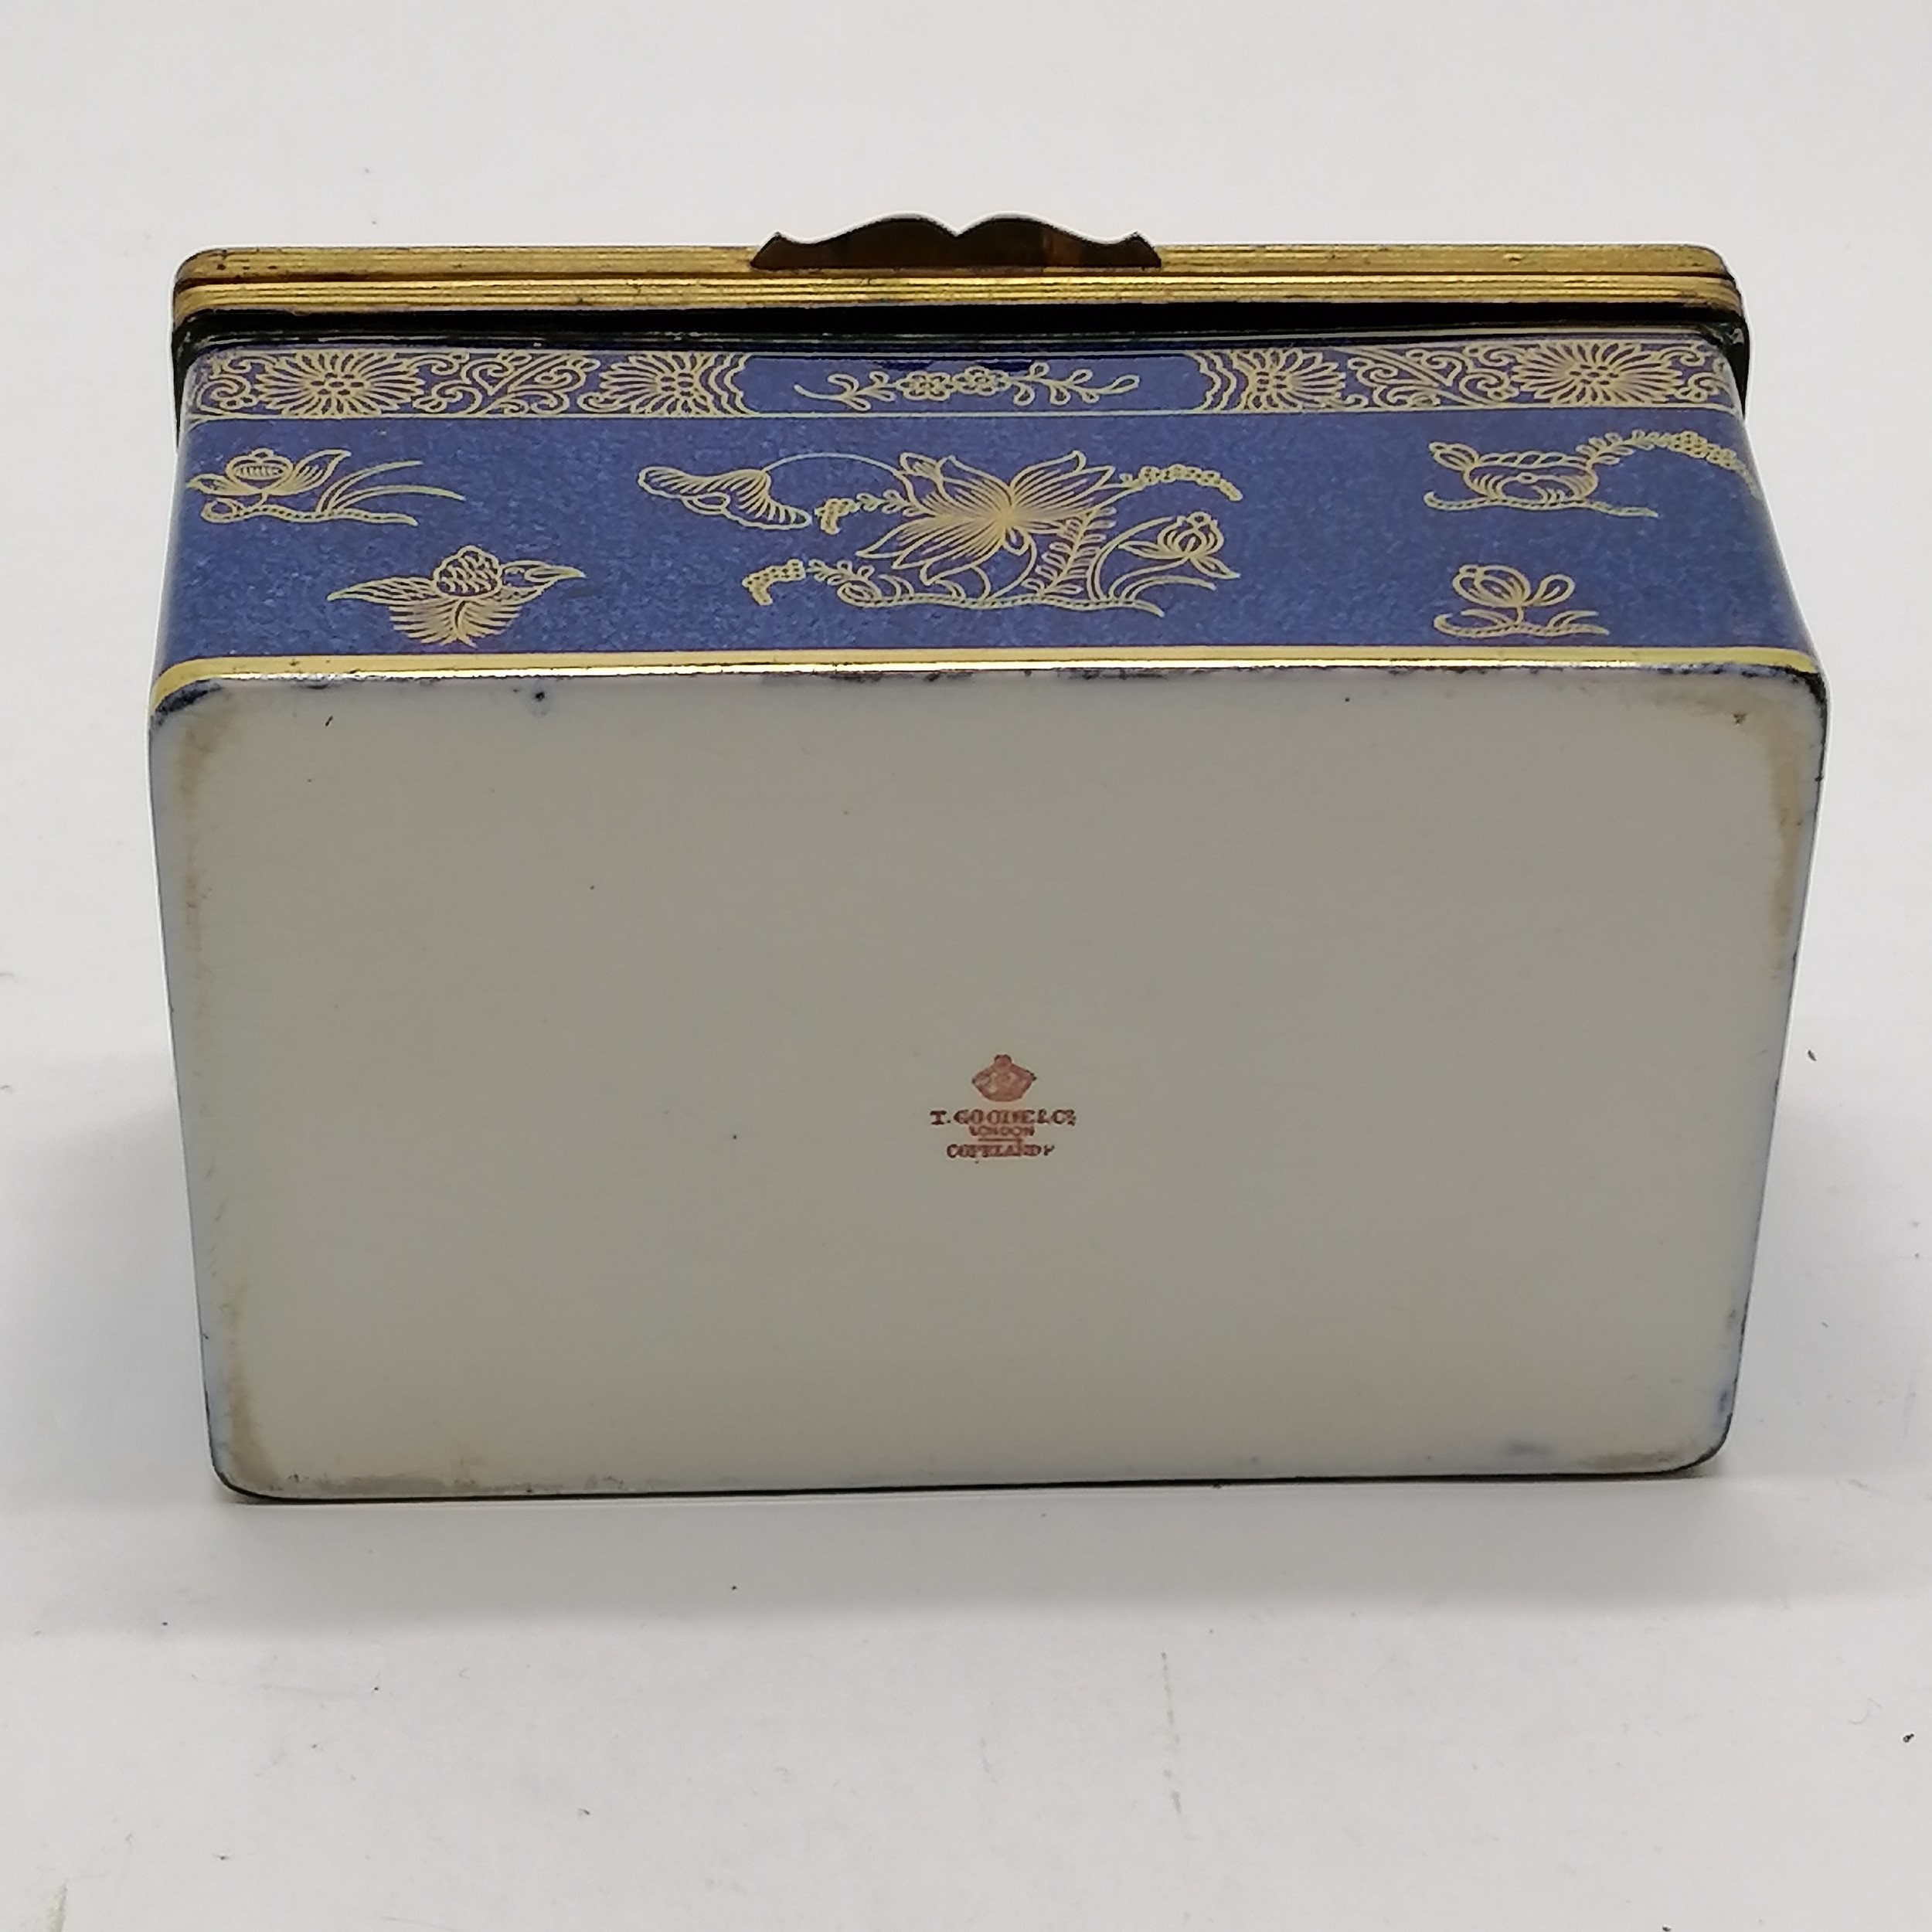 T Goode & Co (London) Copeland ormolu mounted blue & gilt decorated ceramic table box with - Image 3 of 7